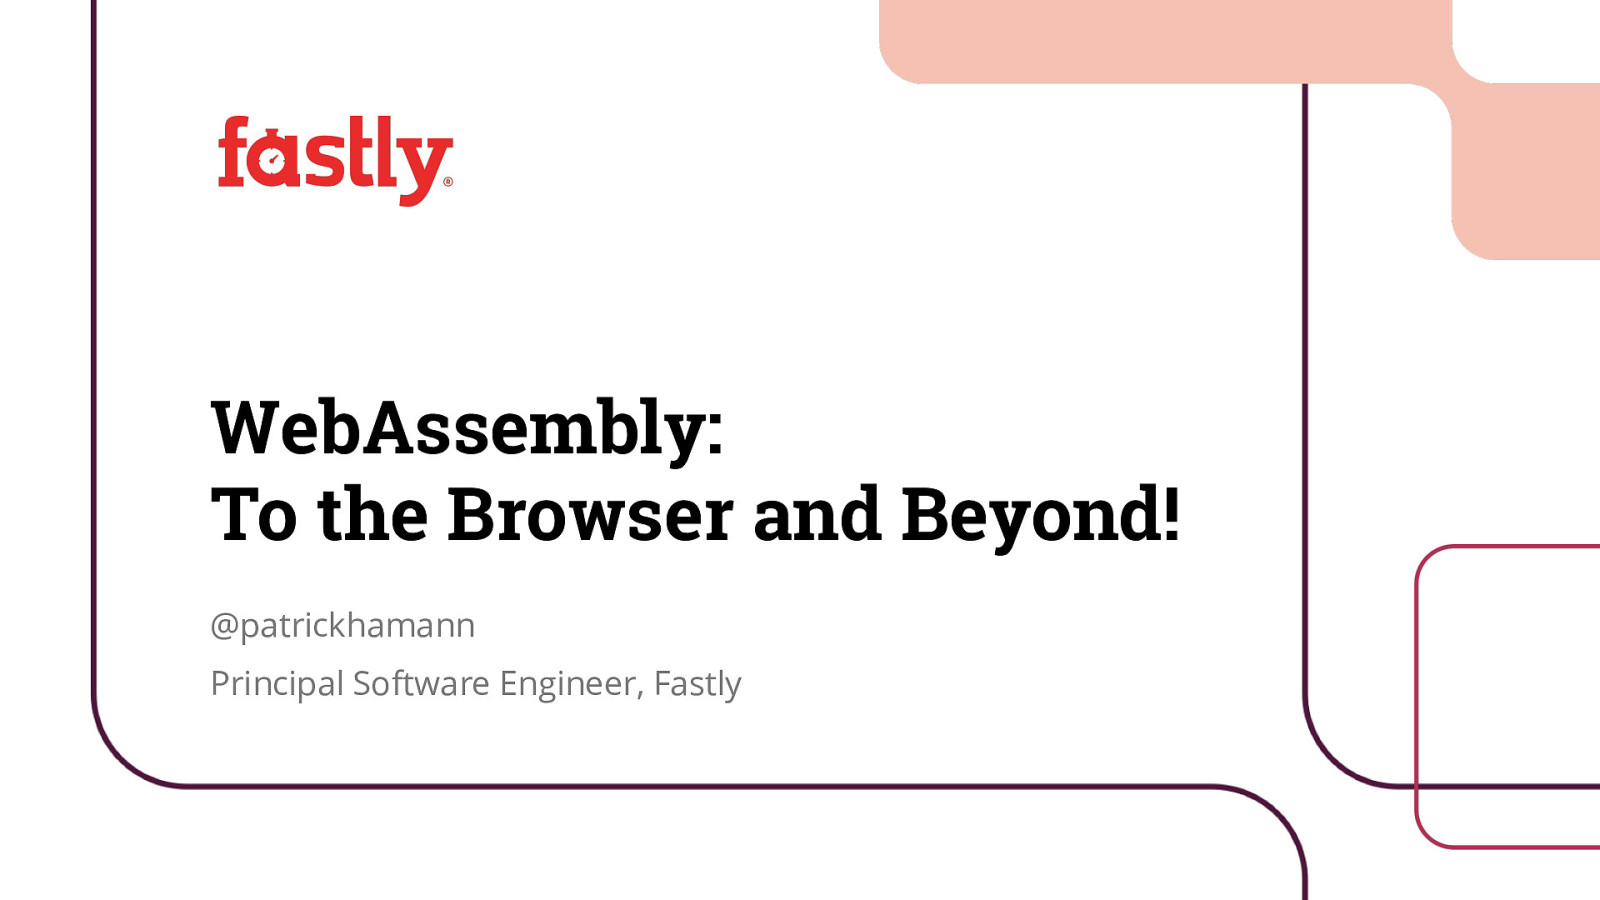 WebAssembly: To the Browser and Beyond!